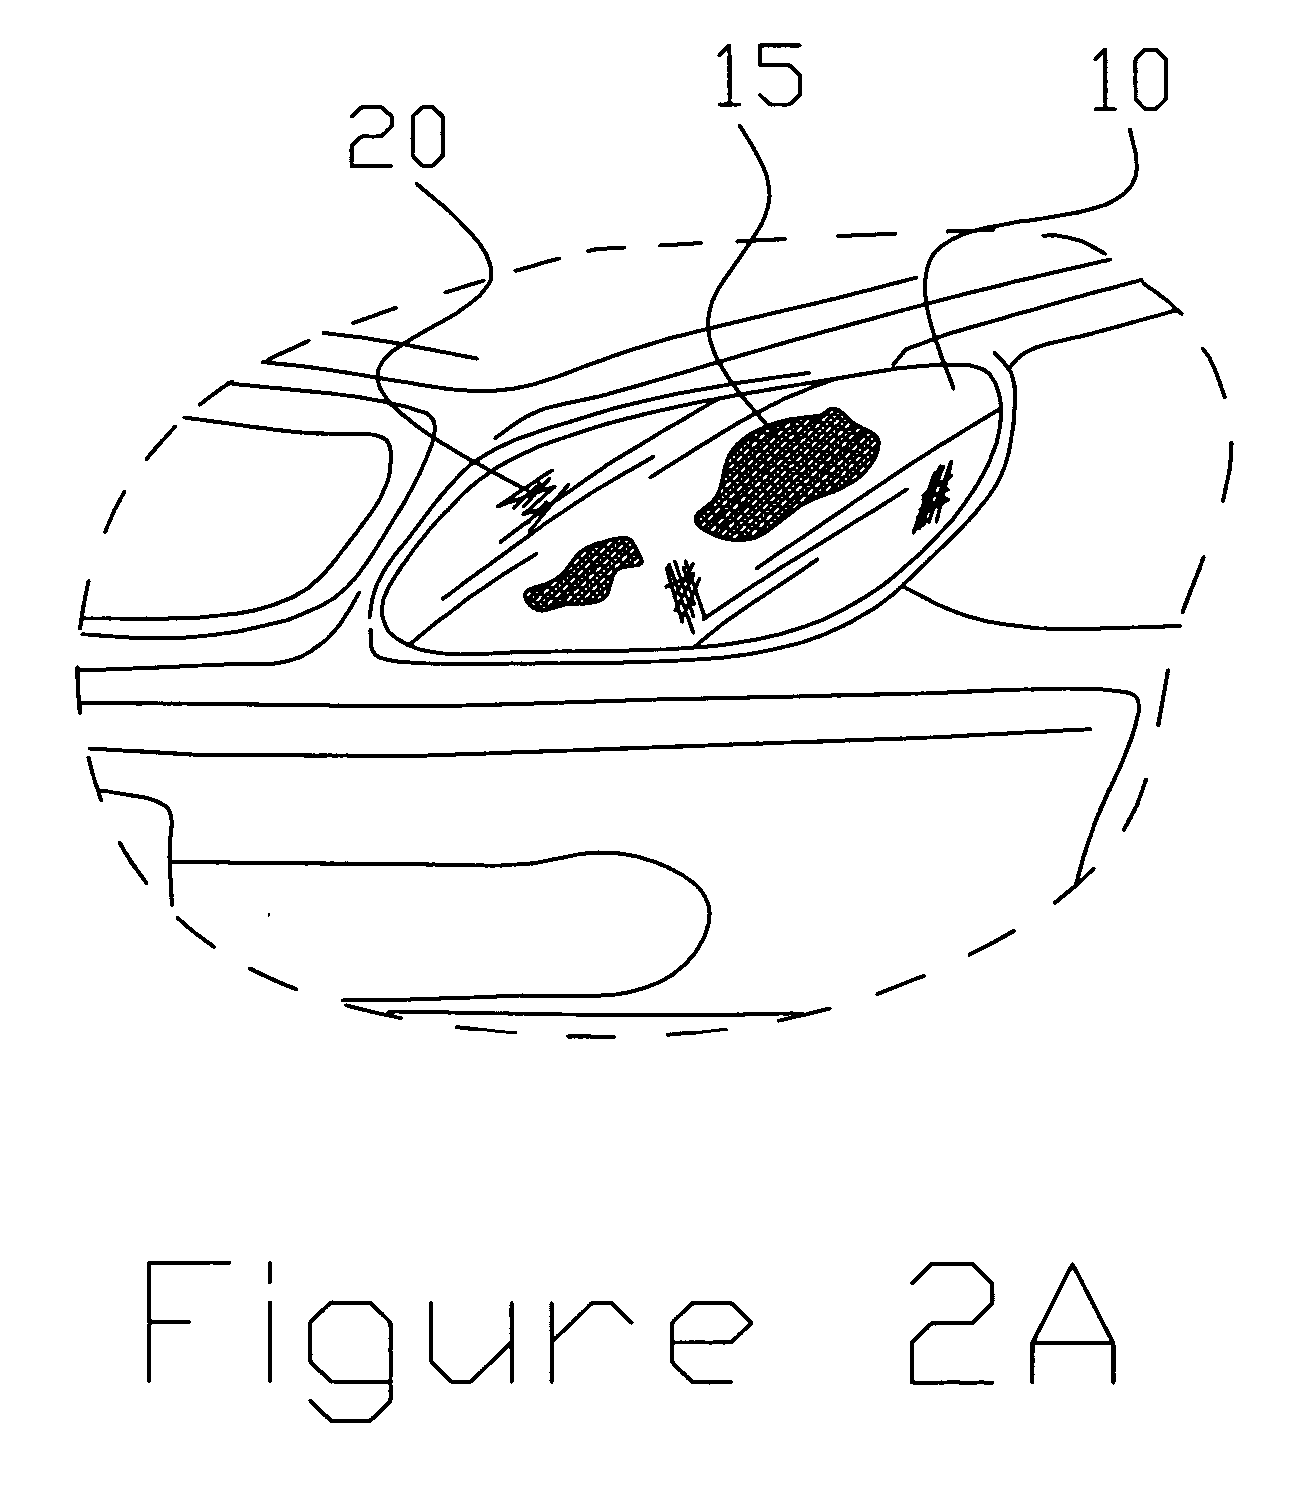 Method and apparatus for restoring automobile headlights